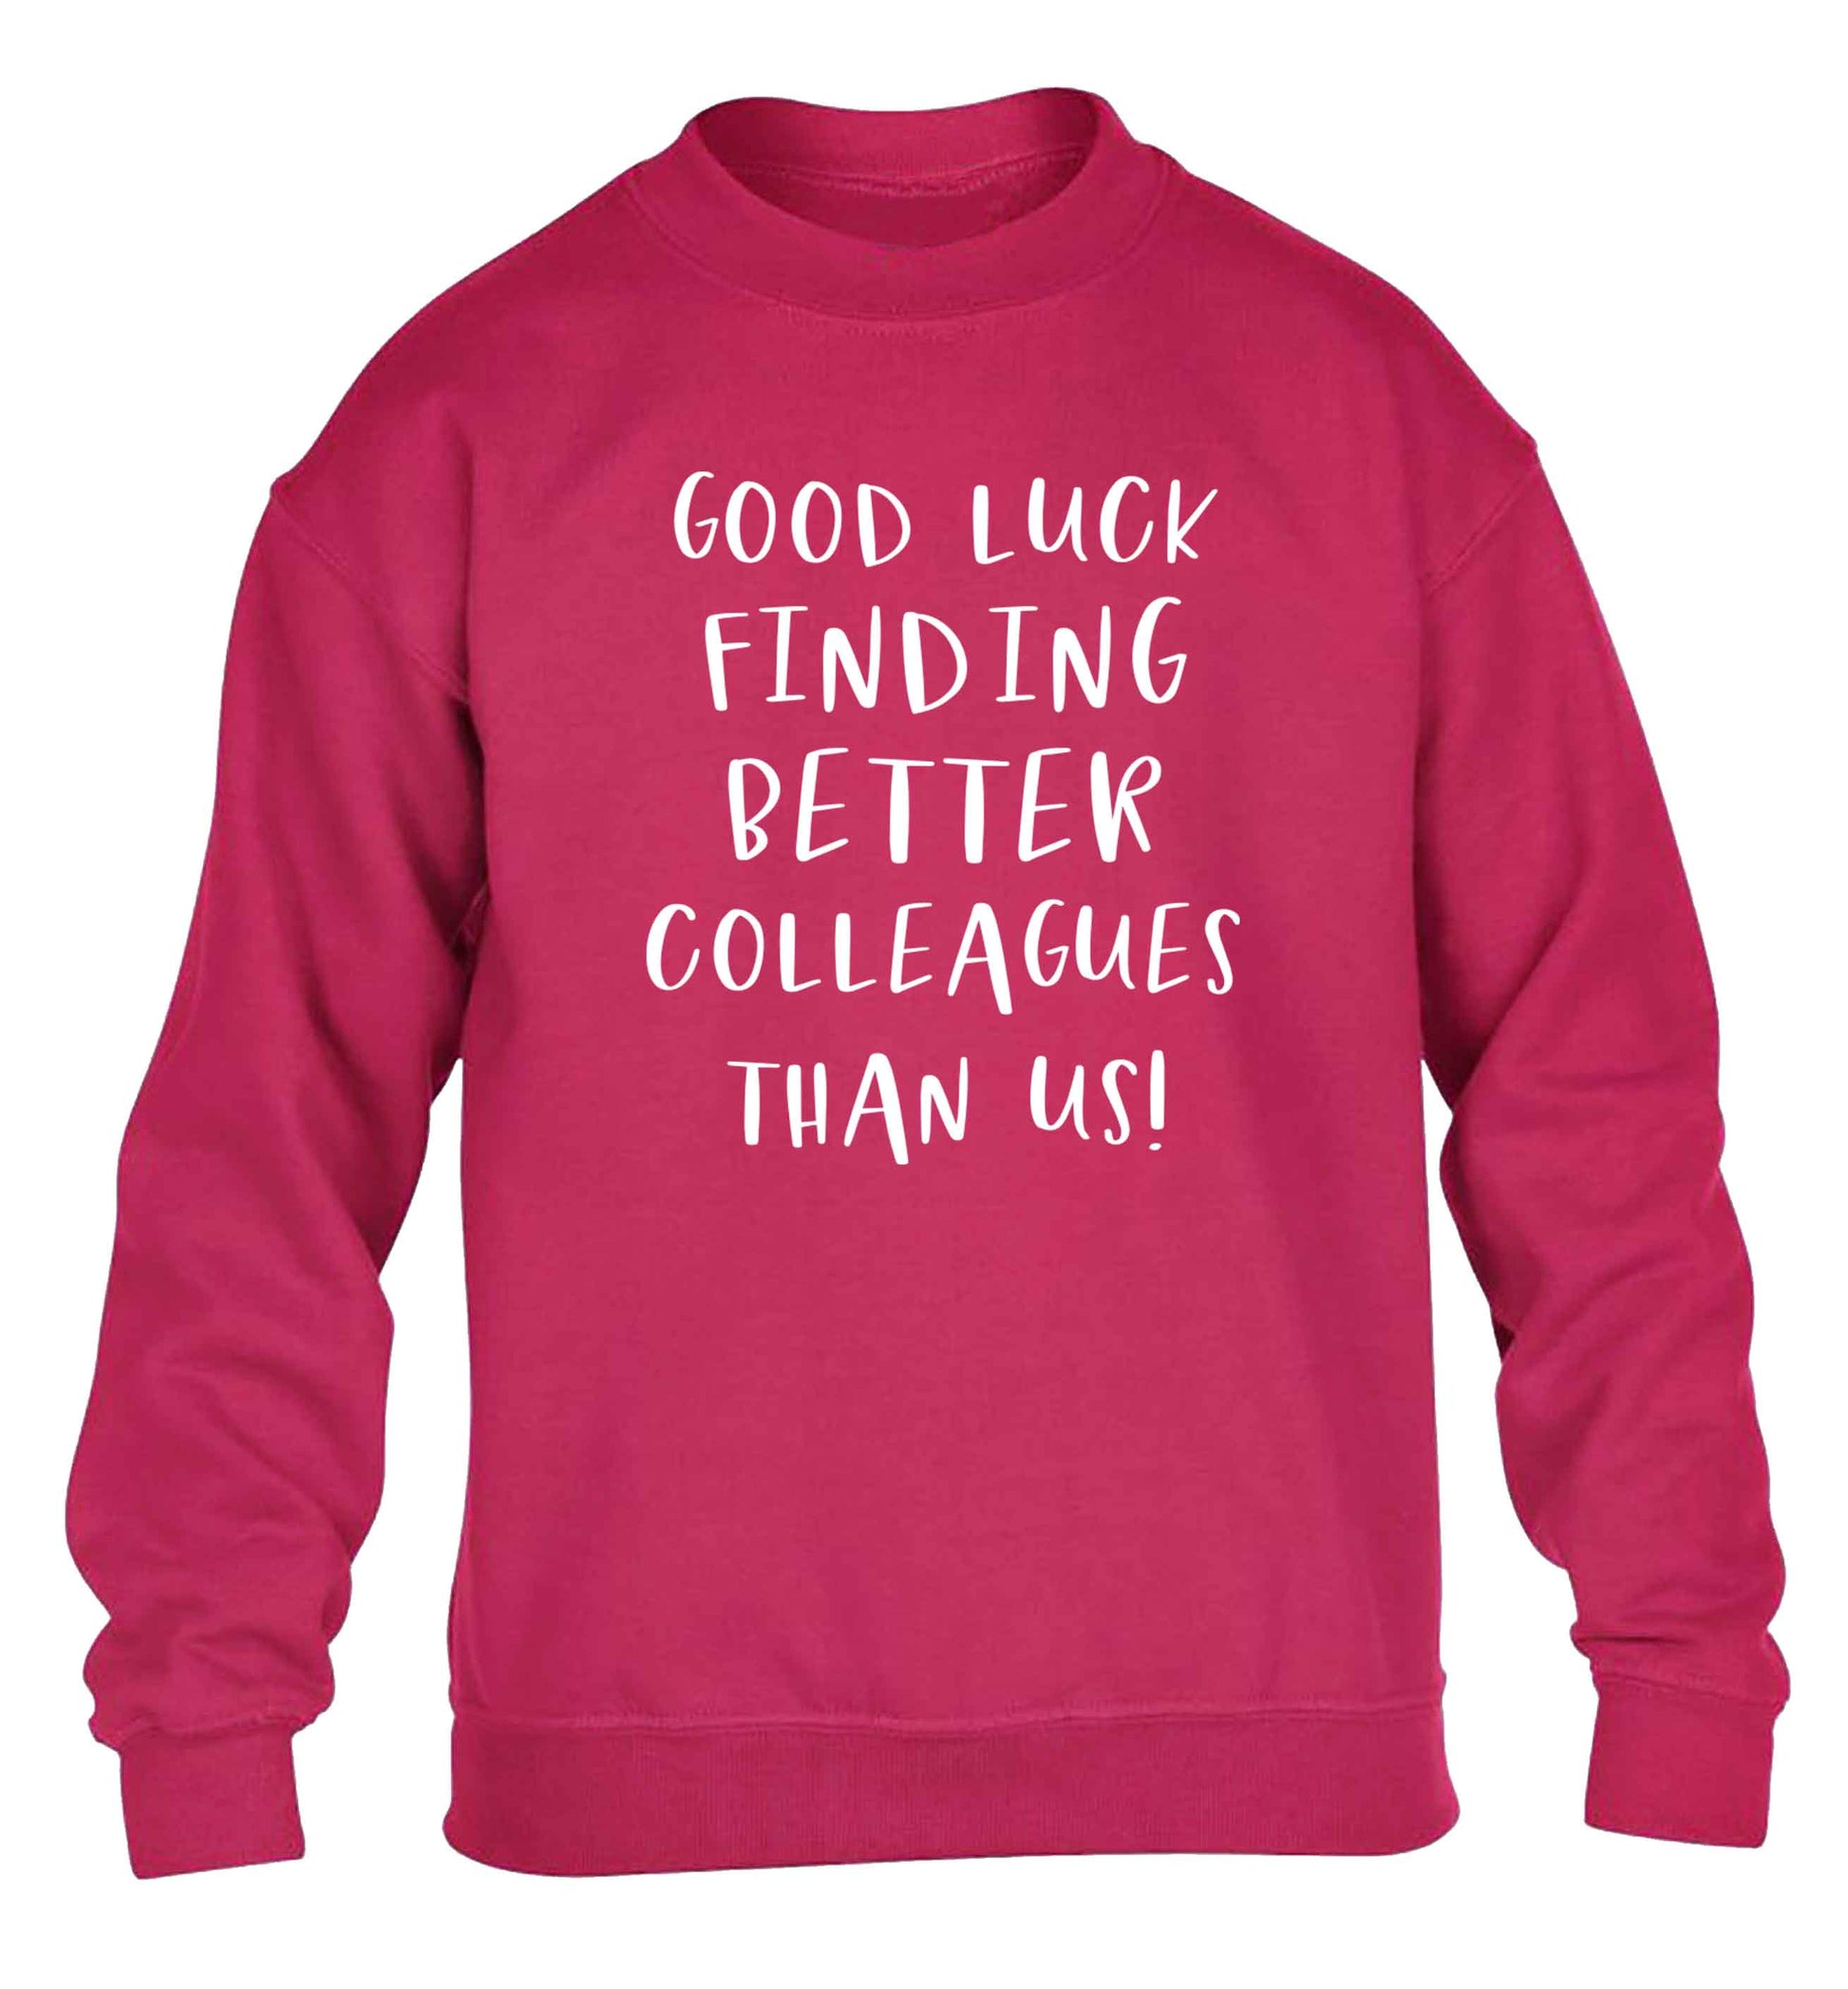 Good luck finding better colleagues than us! children's pink sweater 12-13 Years